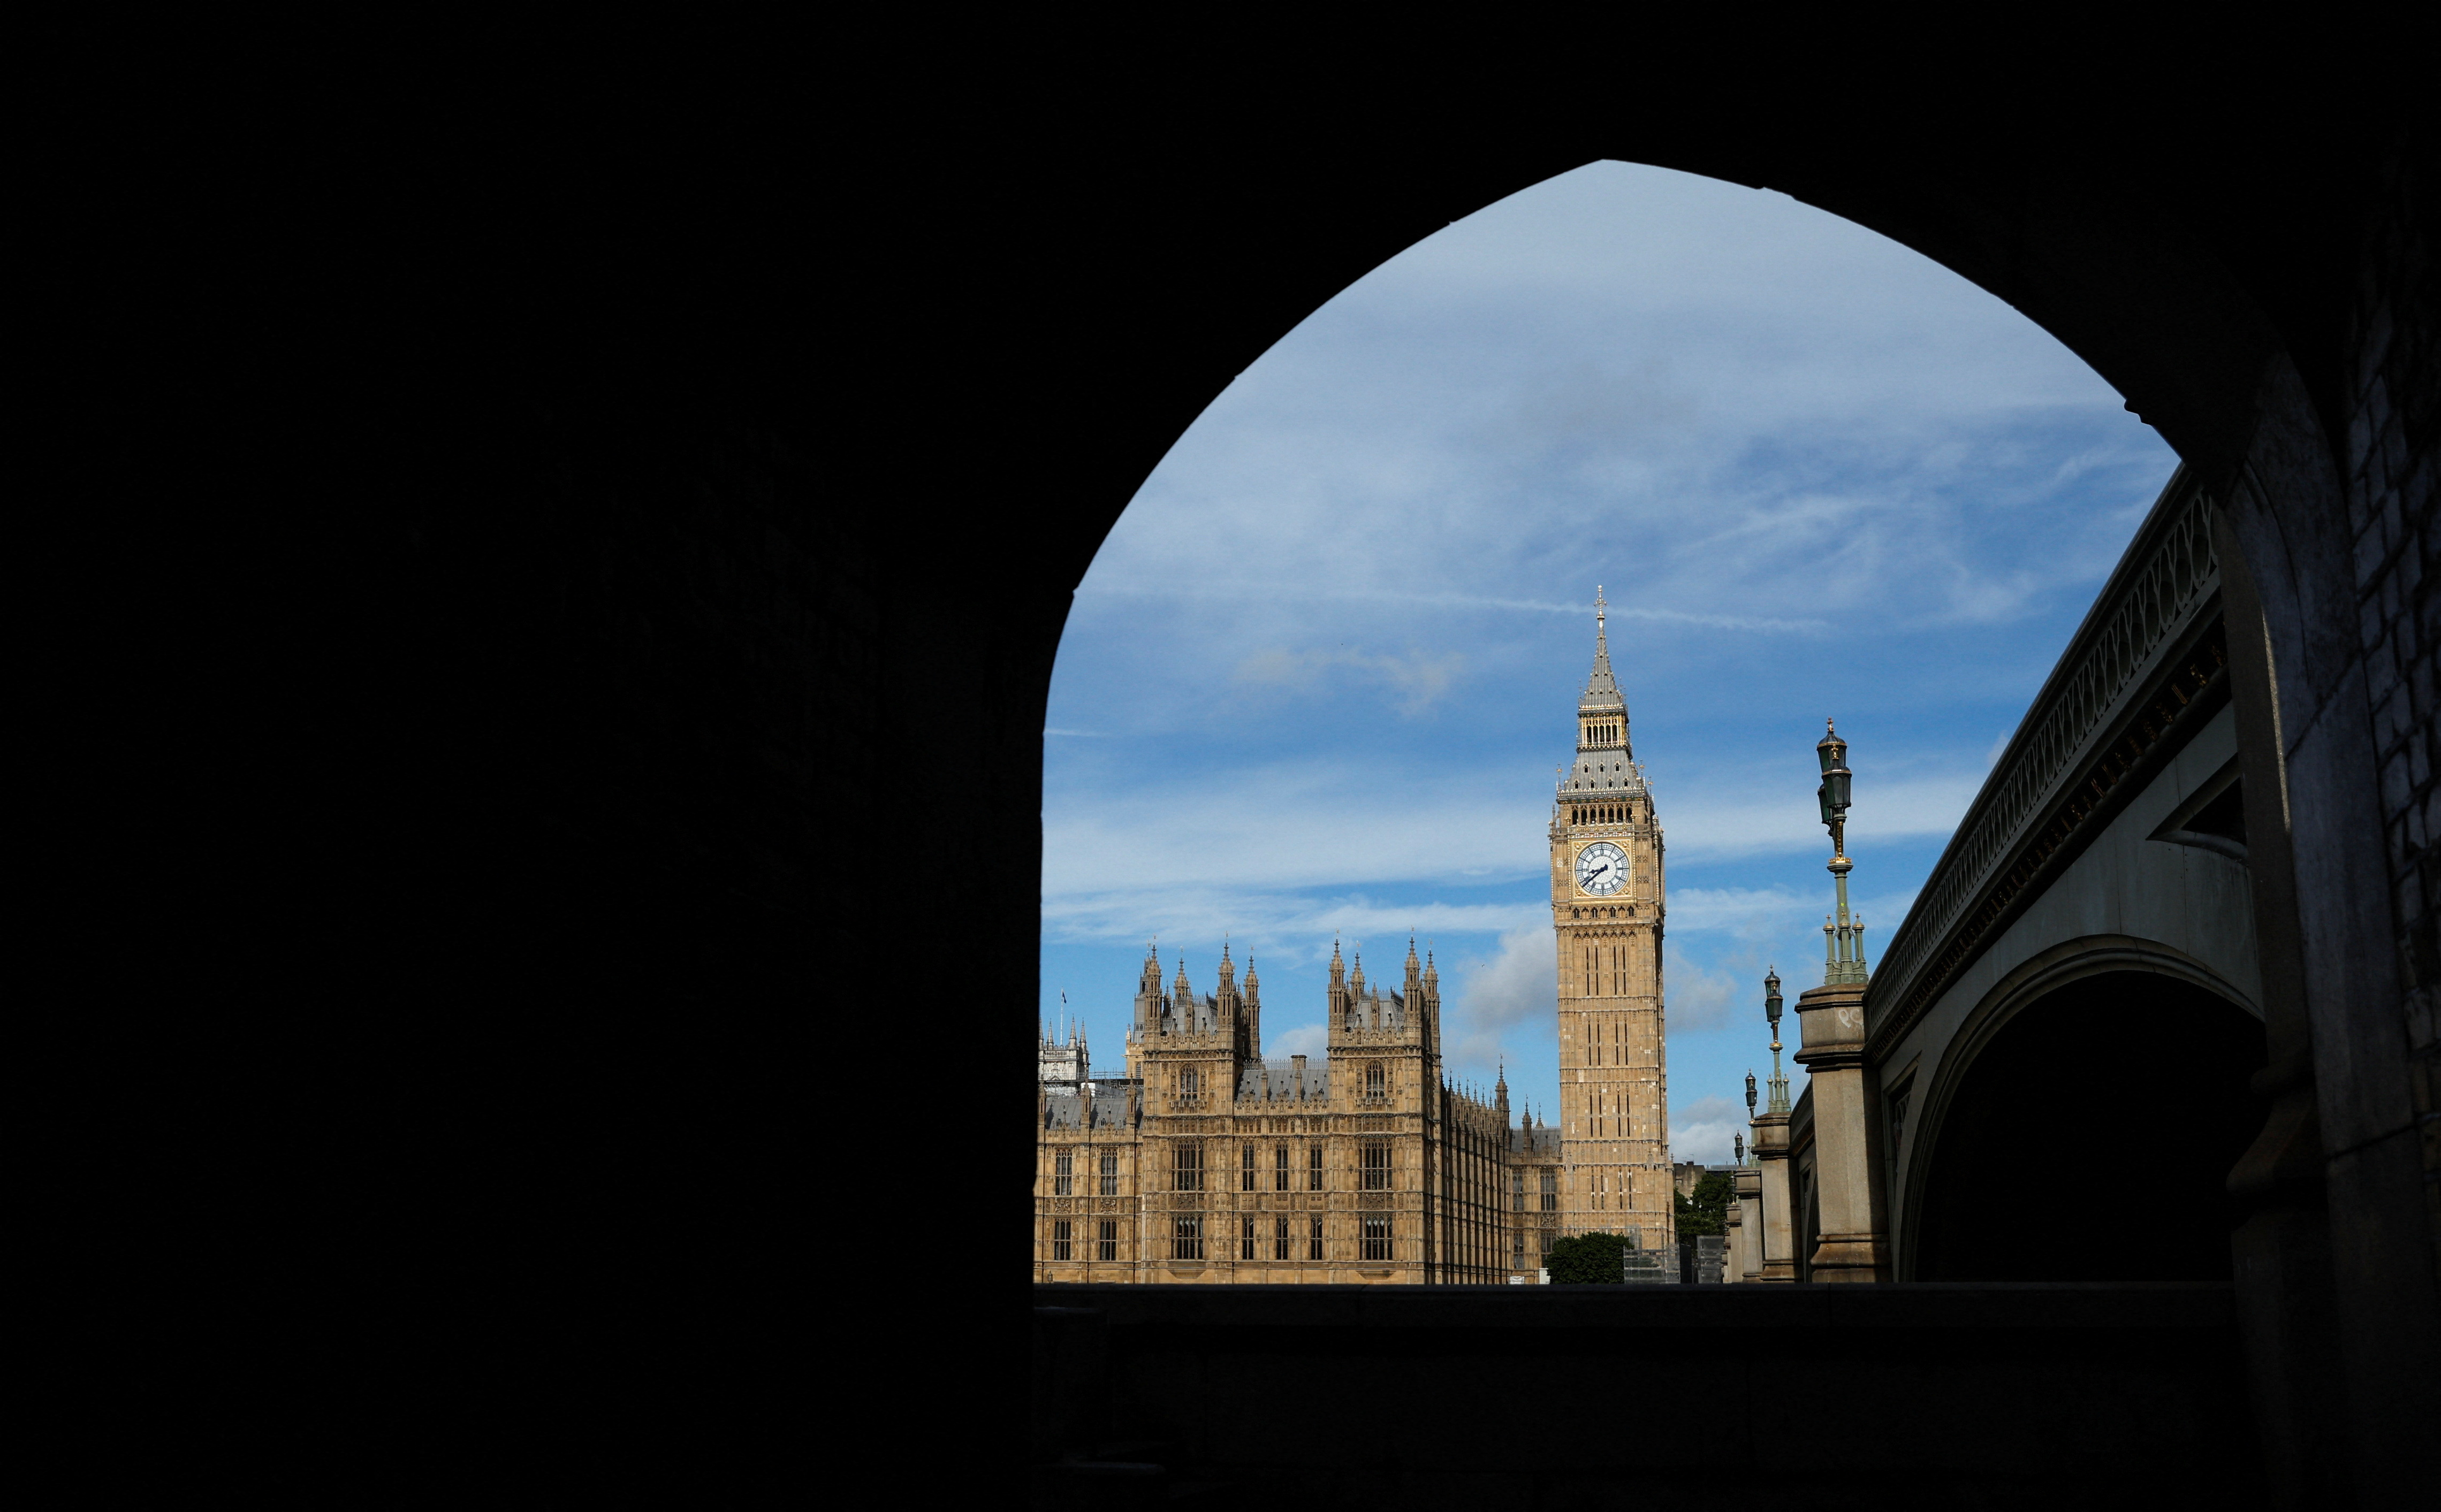 The Elizabeth Tower of the Houses of Parliament, commonly known as Big Ben, is seen in London